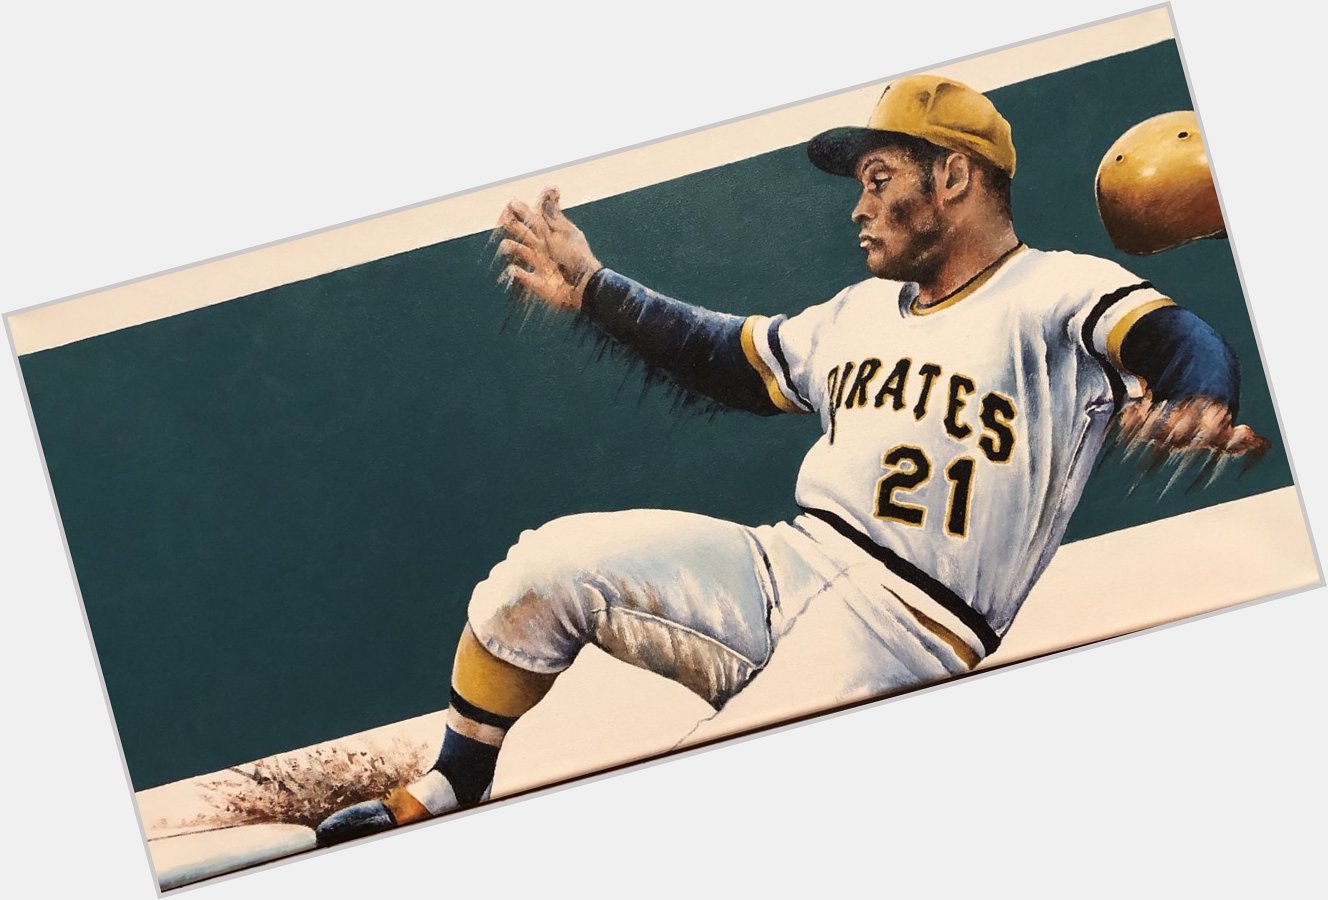 Happy 87th birthday to the great Roberto Clemente! 